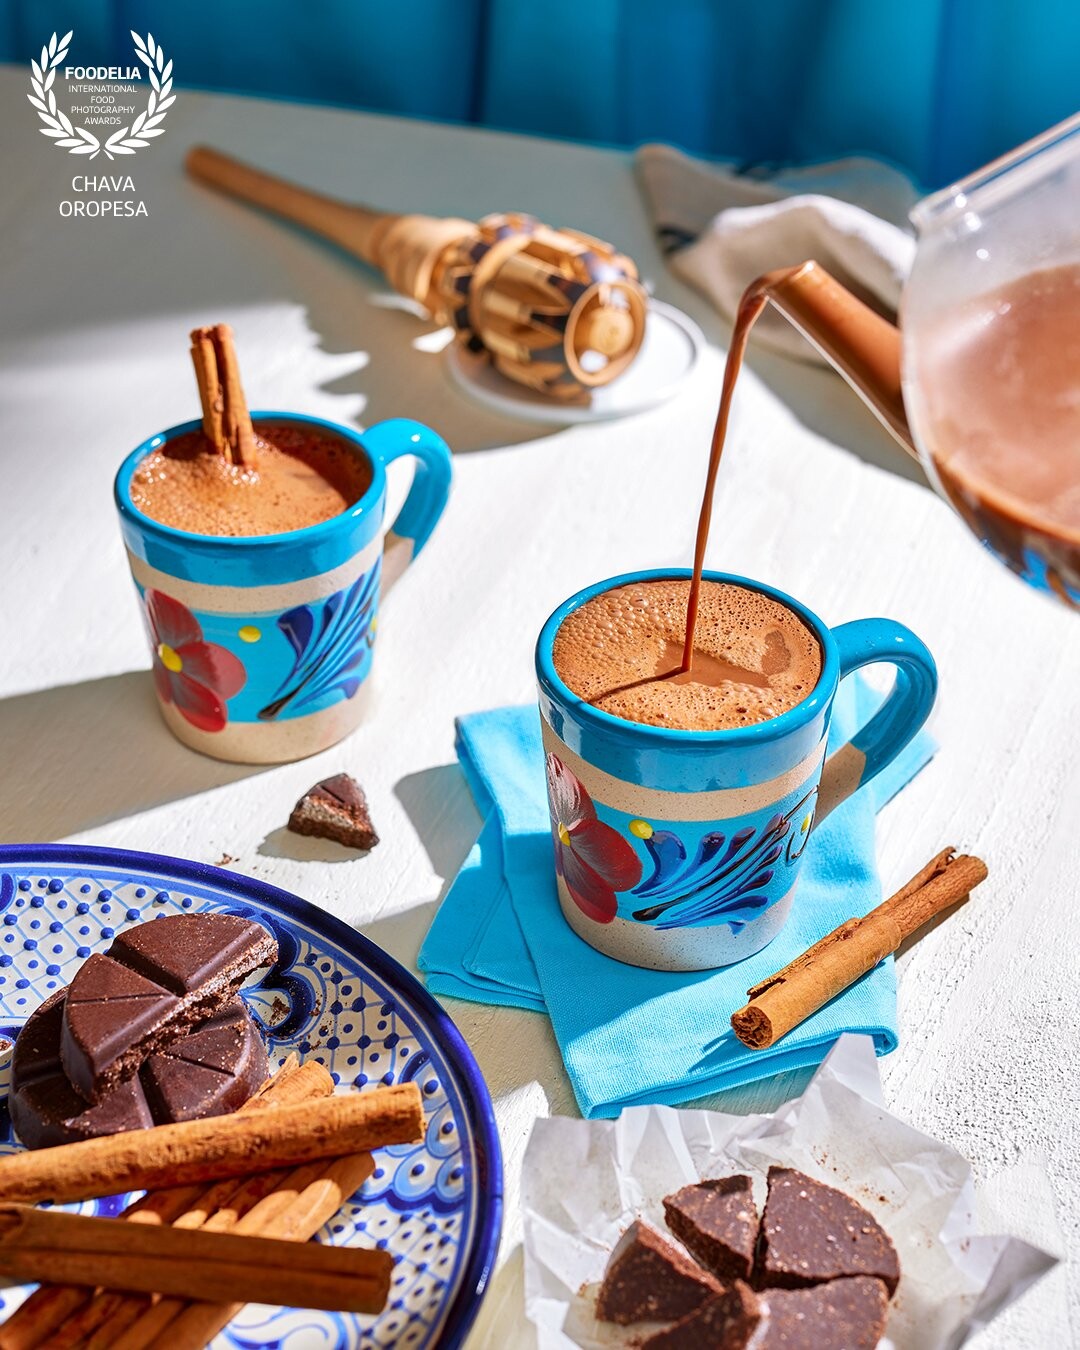 "Champurrado" is a traditional Mexican beverage made with corn masa, water, chocolate and sweetened with piloncillo. It has a thick rich texture and is usually served warm to accompany tamales or churros. <br />
Image created for a Christmas editorial for VegNew Magazine Holiday issue.